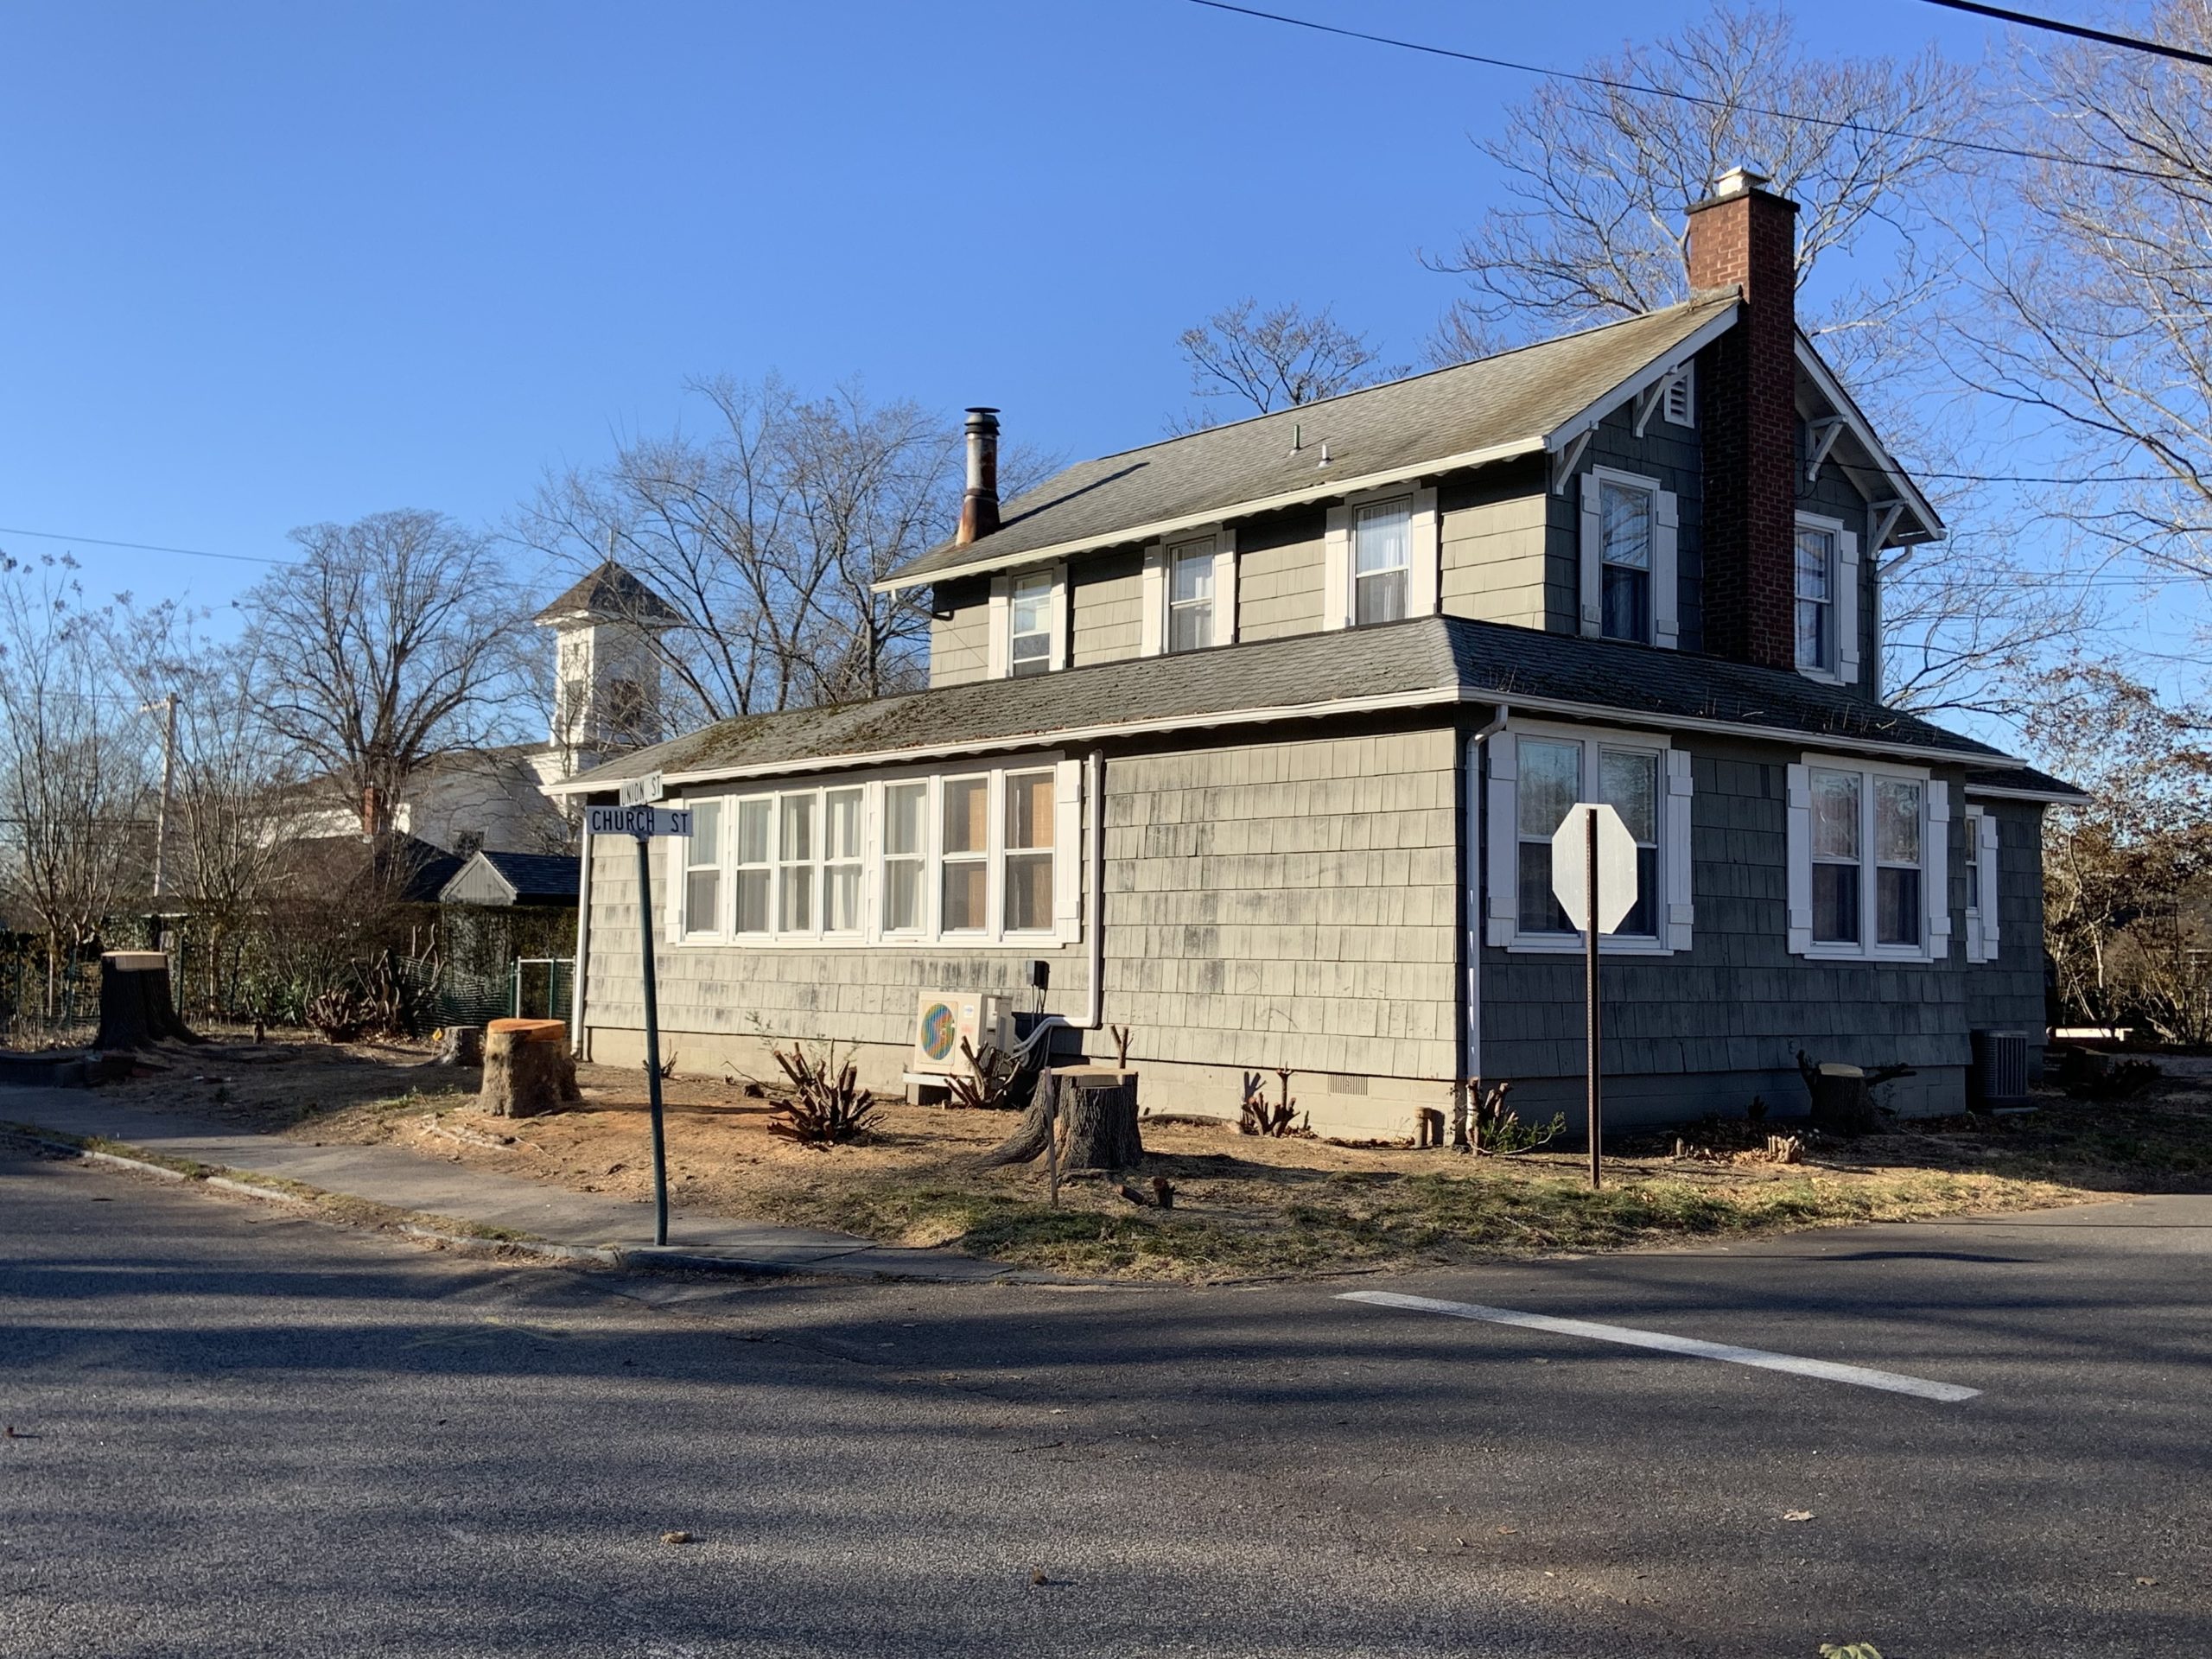 Even though it was approved by Sag Harbor Village, the removal of every tree and shrub from this property at the corner of Union and Church Streets has drawn responses ranging from anguish to anger. STEPHEN J. KOTZ